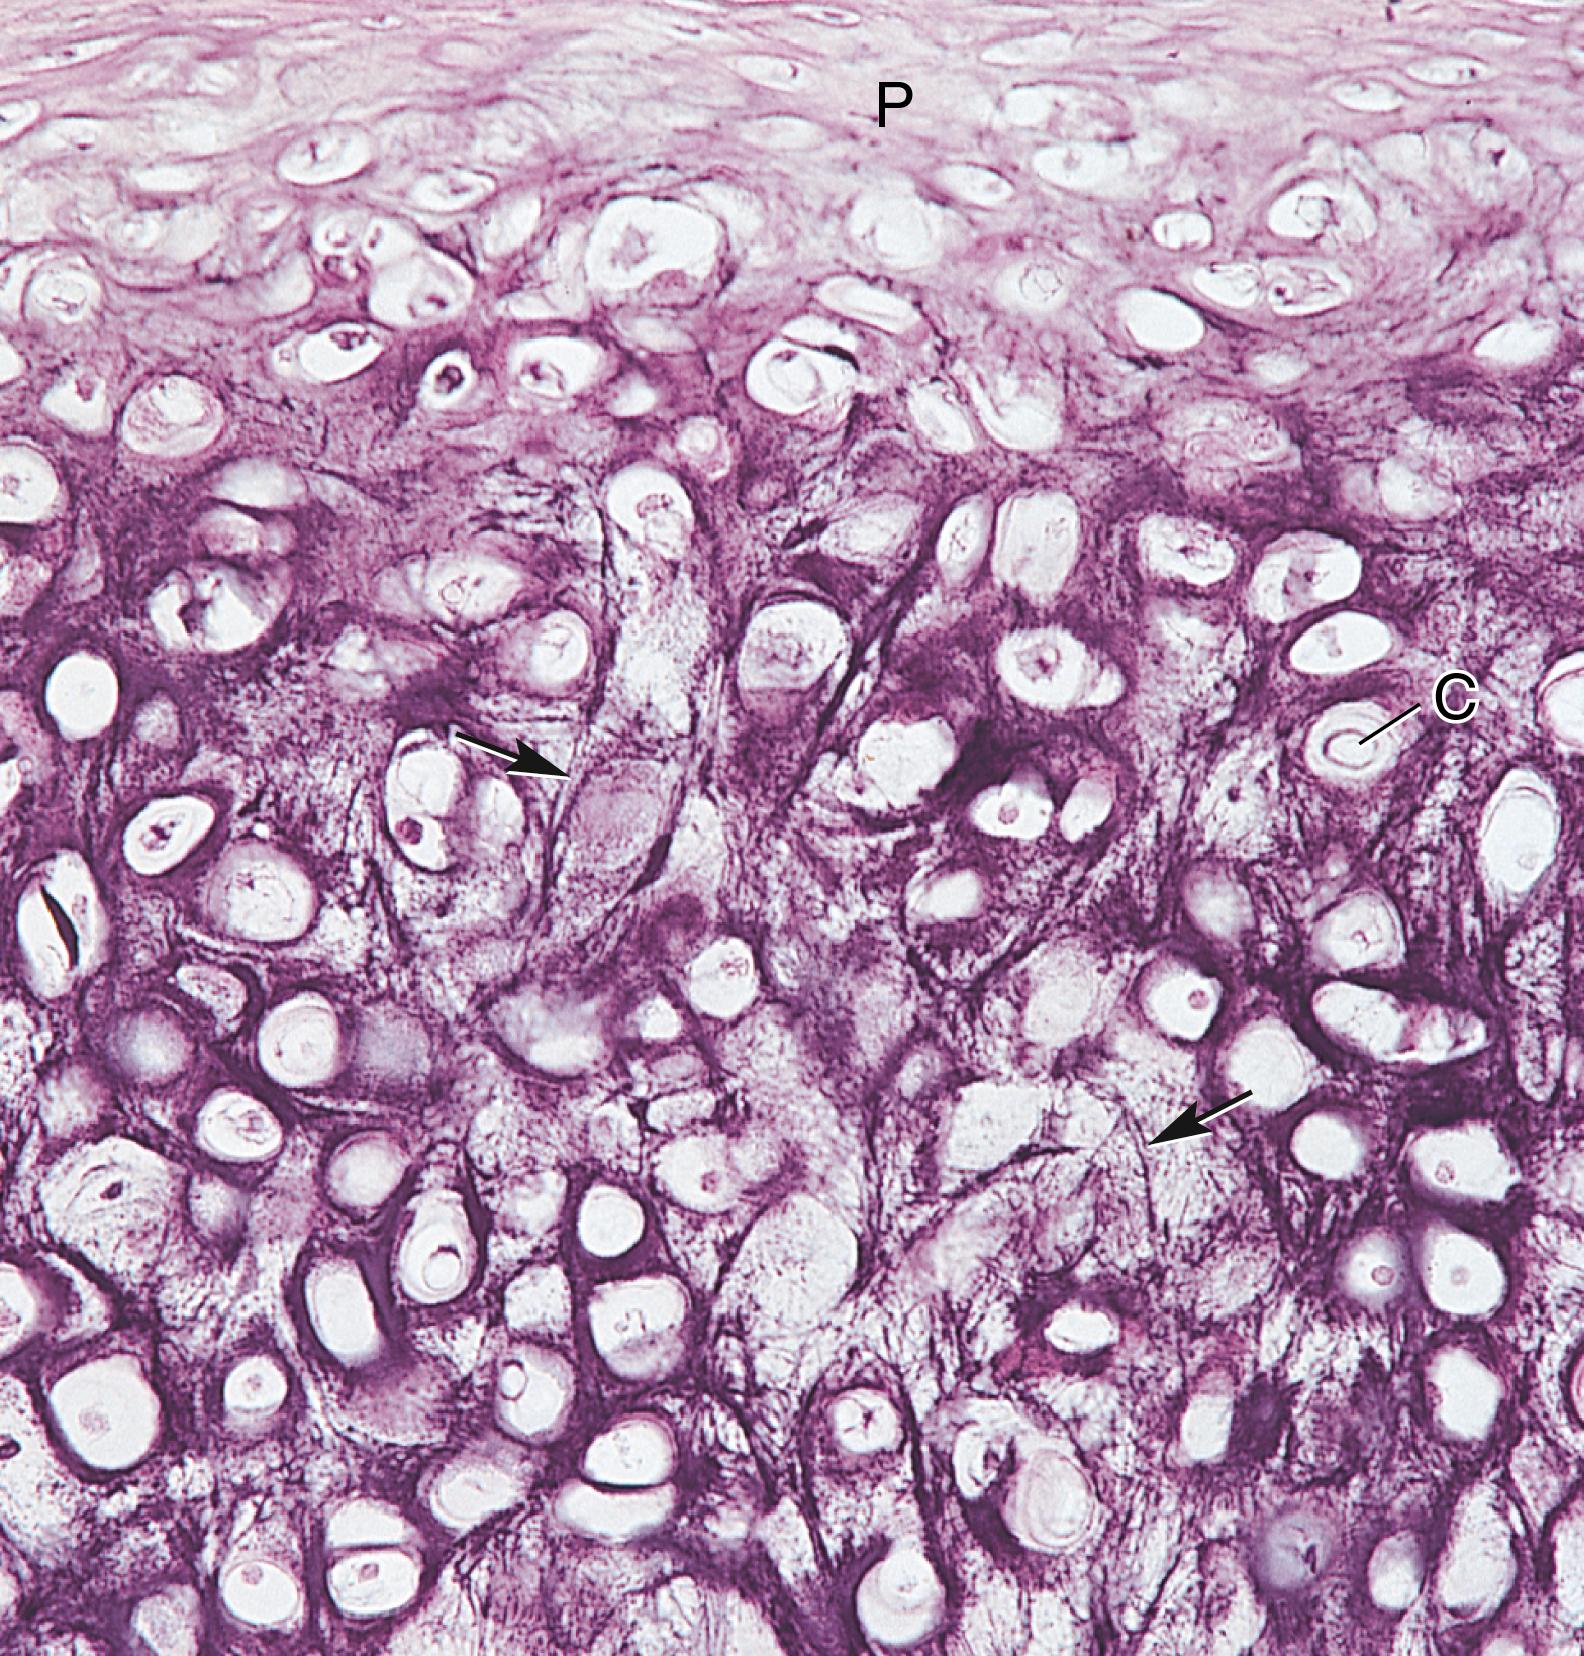 Fig. 7.5, Light micrograph of elastic cartilage (×132). Observe the perichondrium (P) and the chondrocytes (C) in their lacunae (shrunken from the walls because of processing), some of which contain more than one cell, evidence of interstitial growth. Elastic fibers (arrows) are scattered throughout.